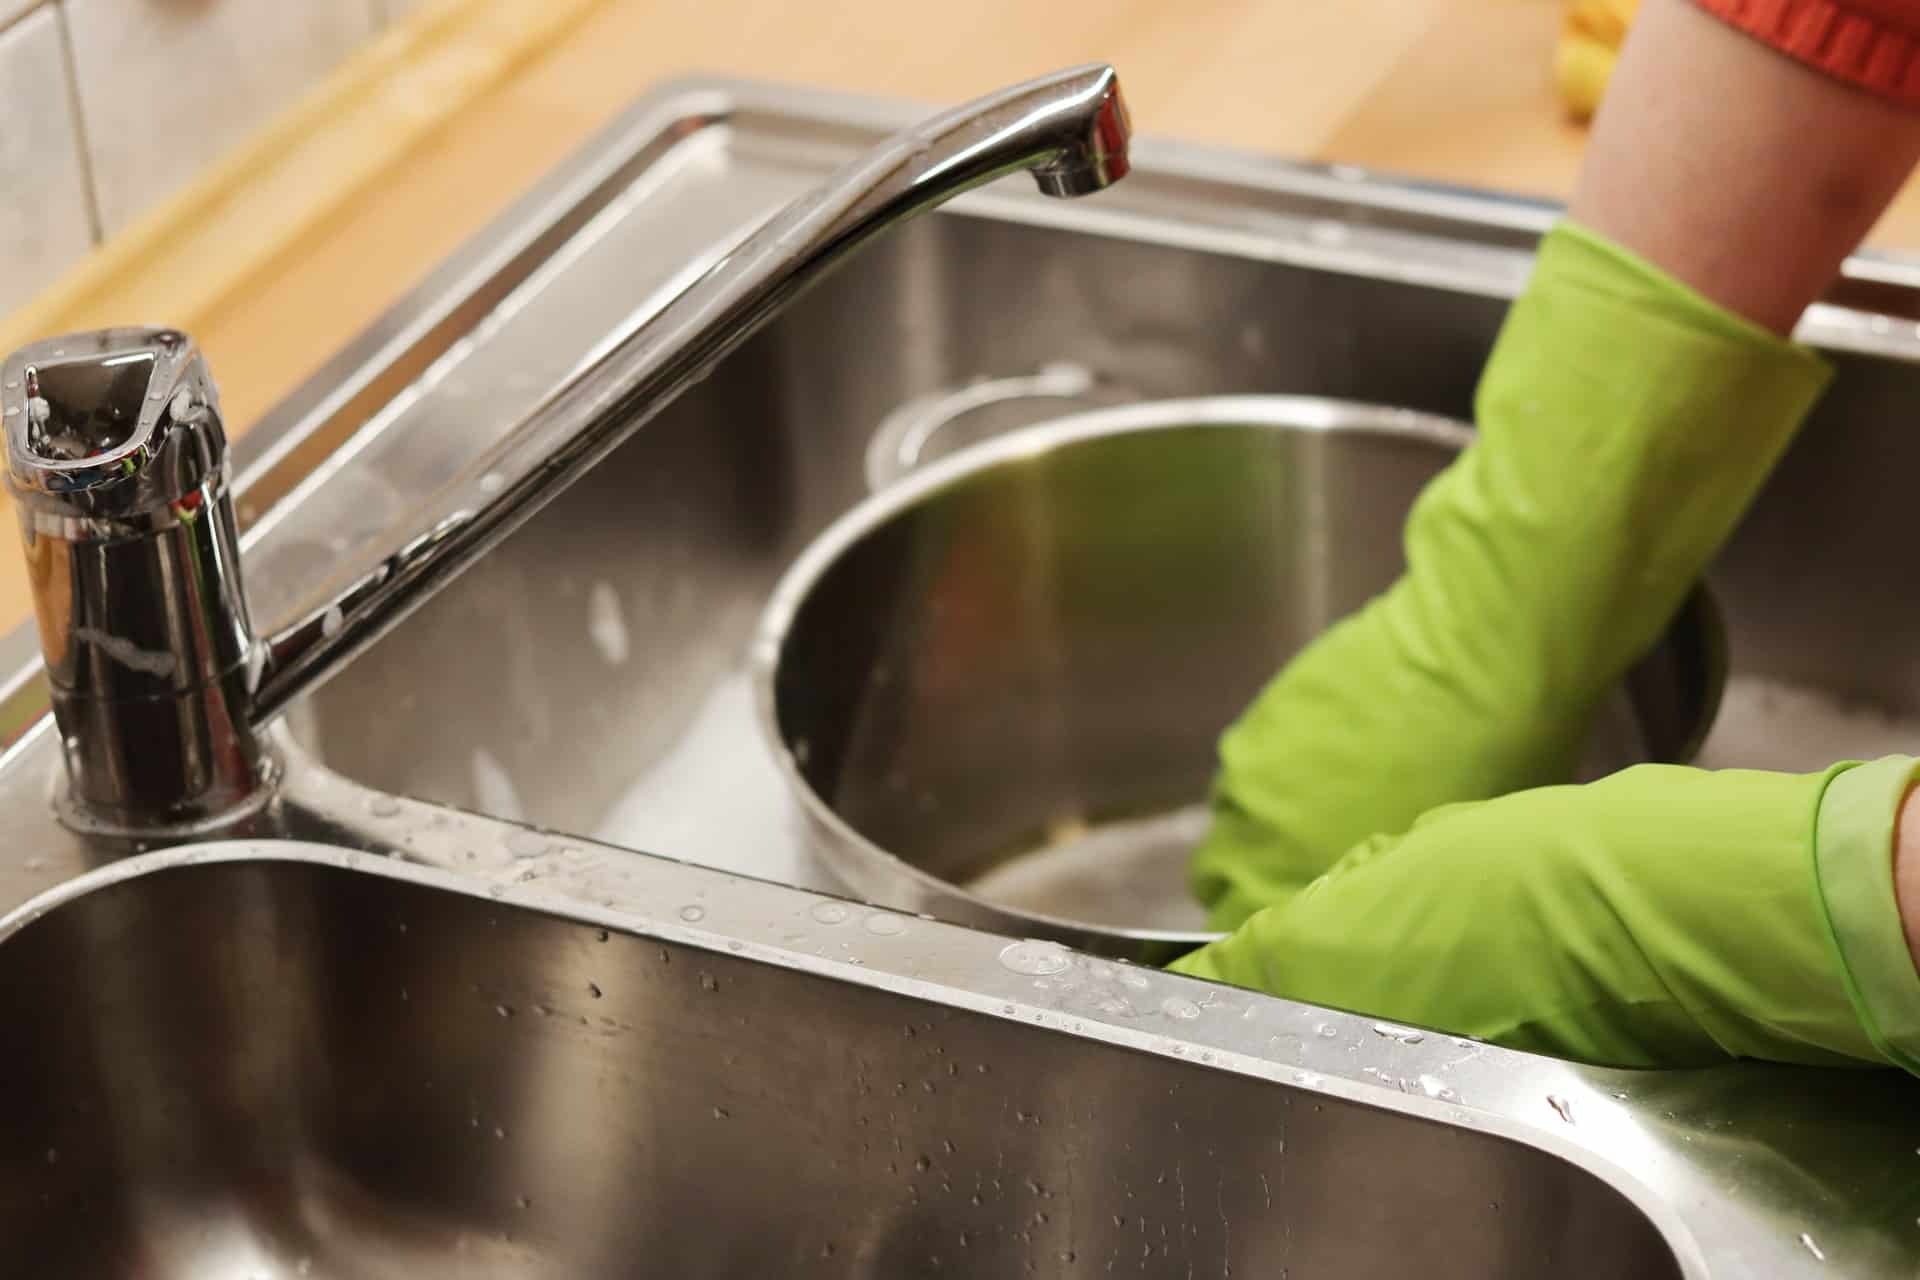 Ecological dishwashing – is it possible?